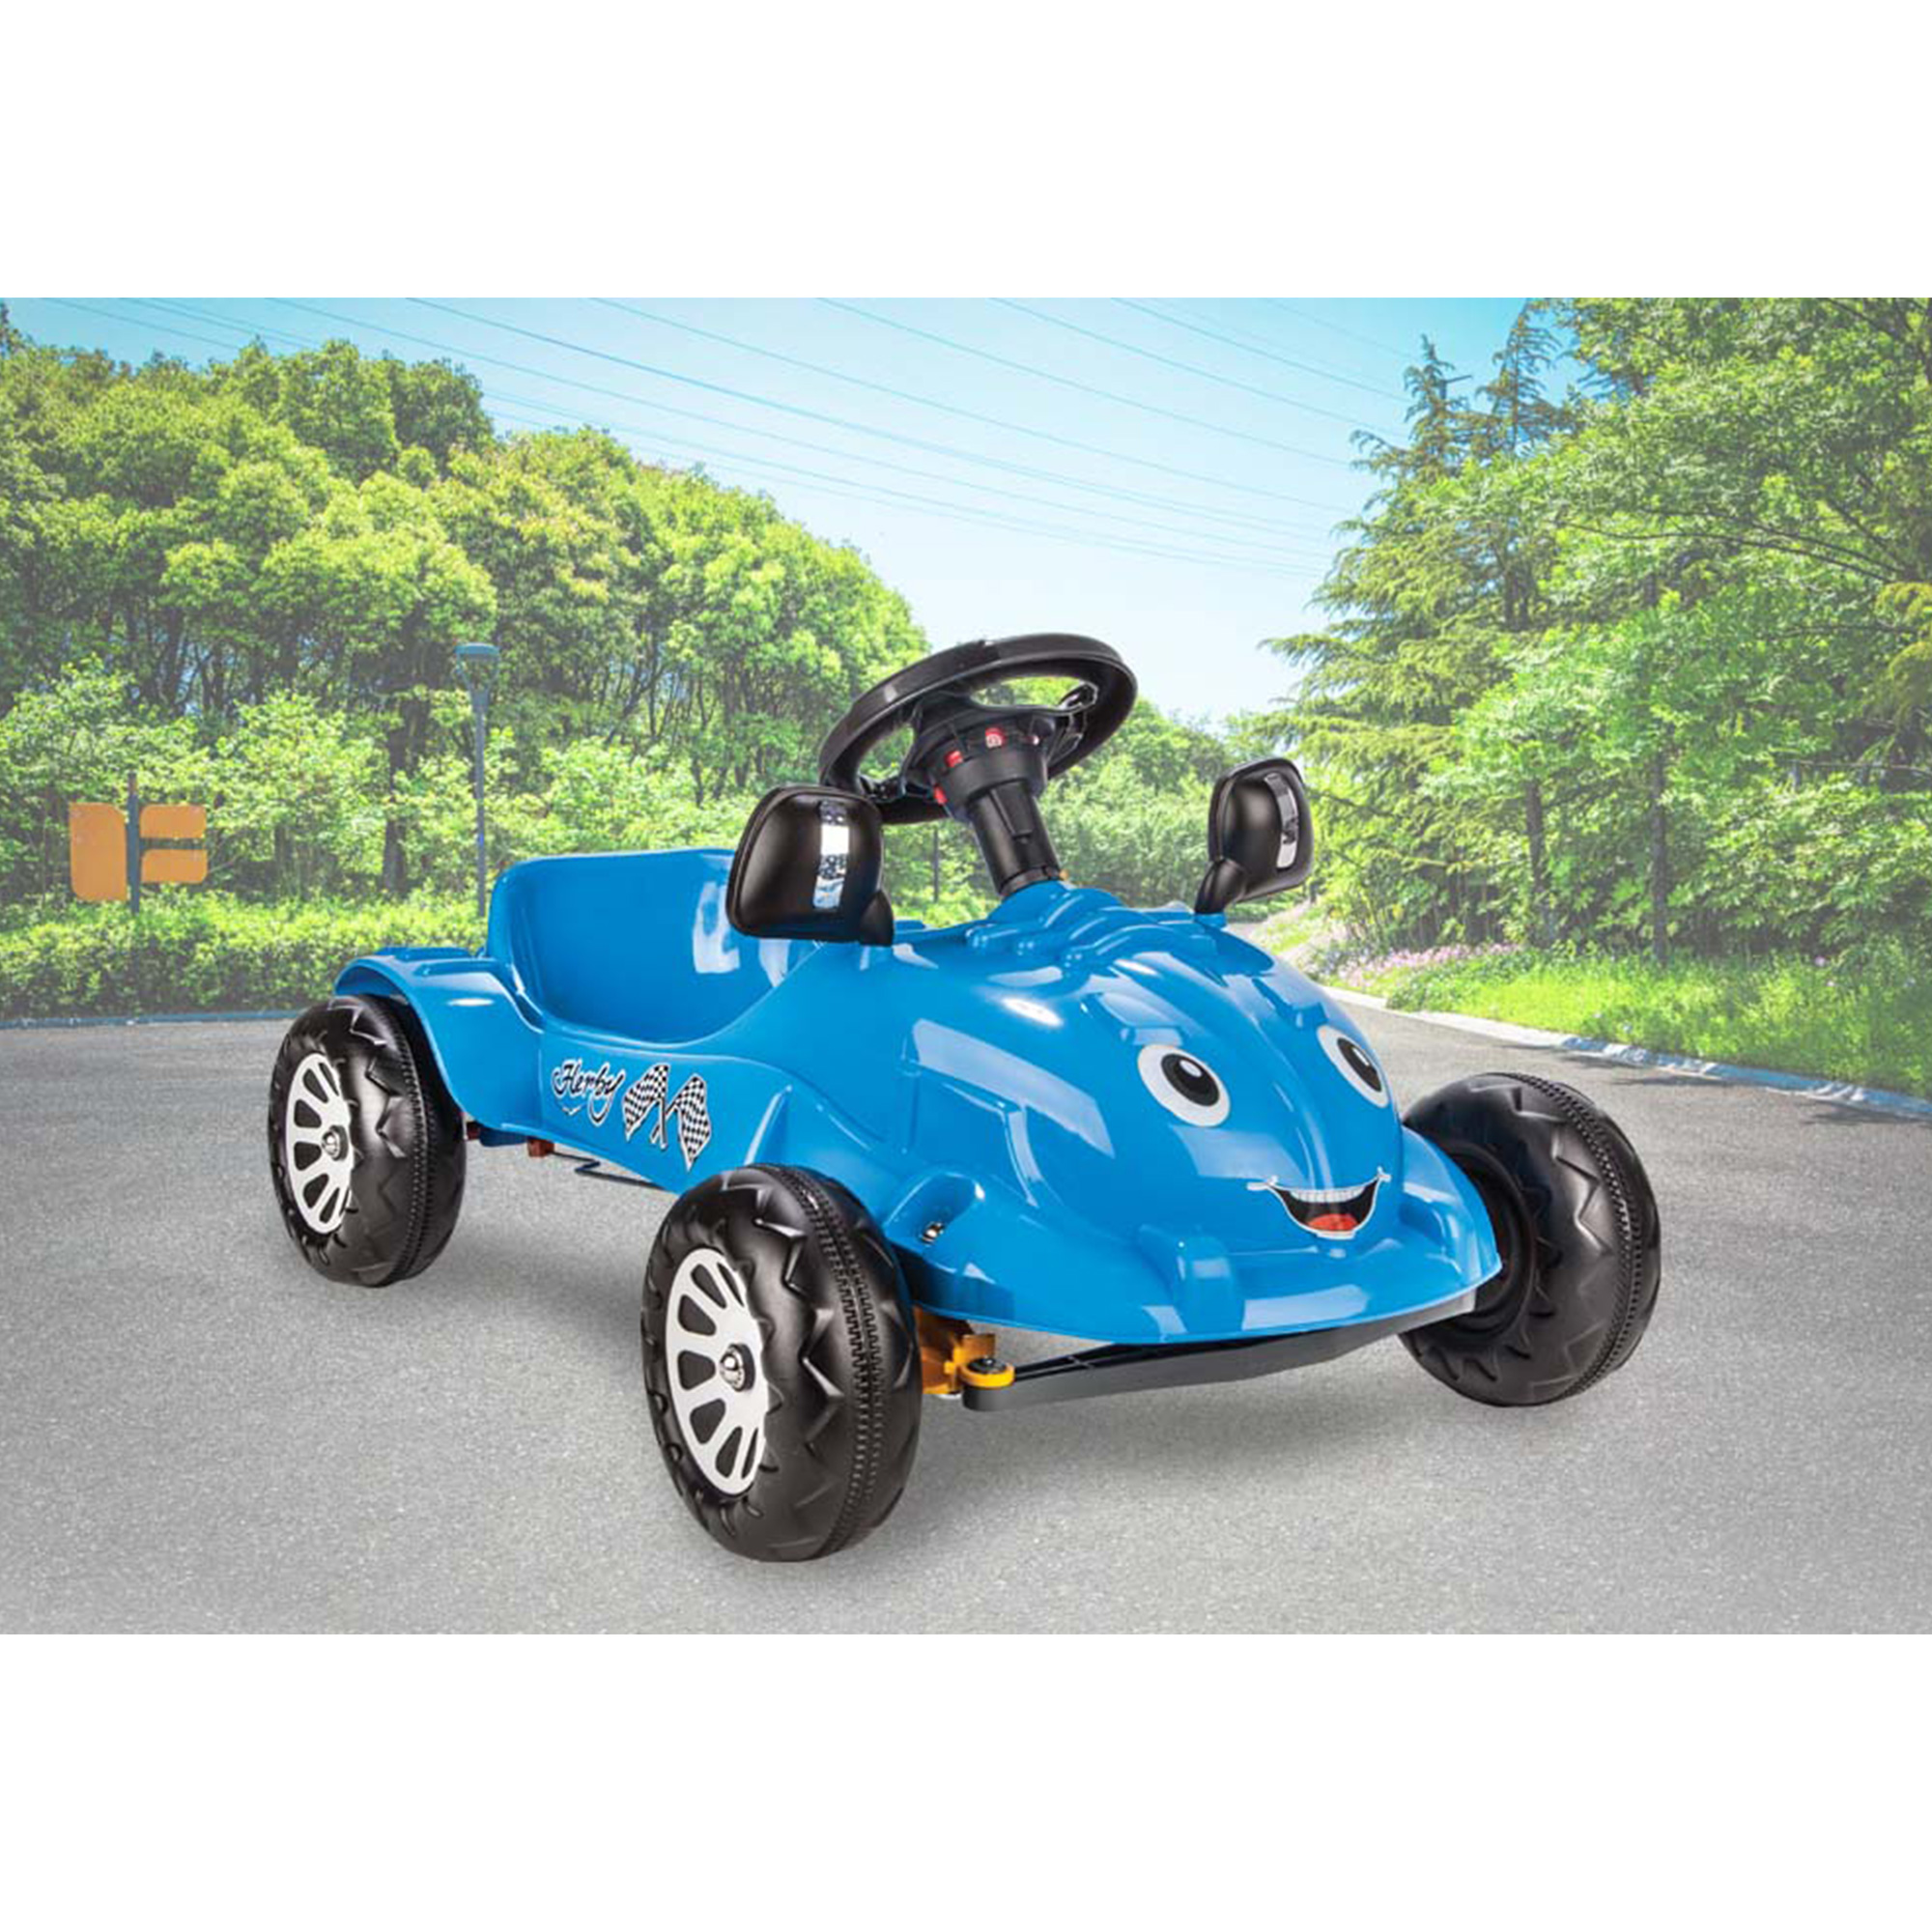 Pilsan Herby Pedal Car w/ Moving Mirrors and Horn for Ages 3 & Up, Blue - image 5 of 5